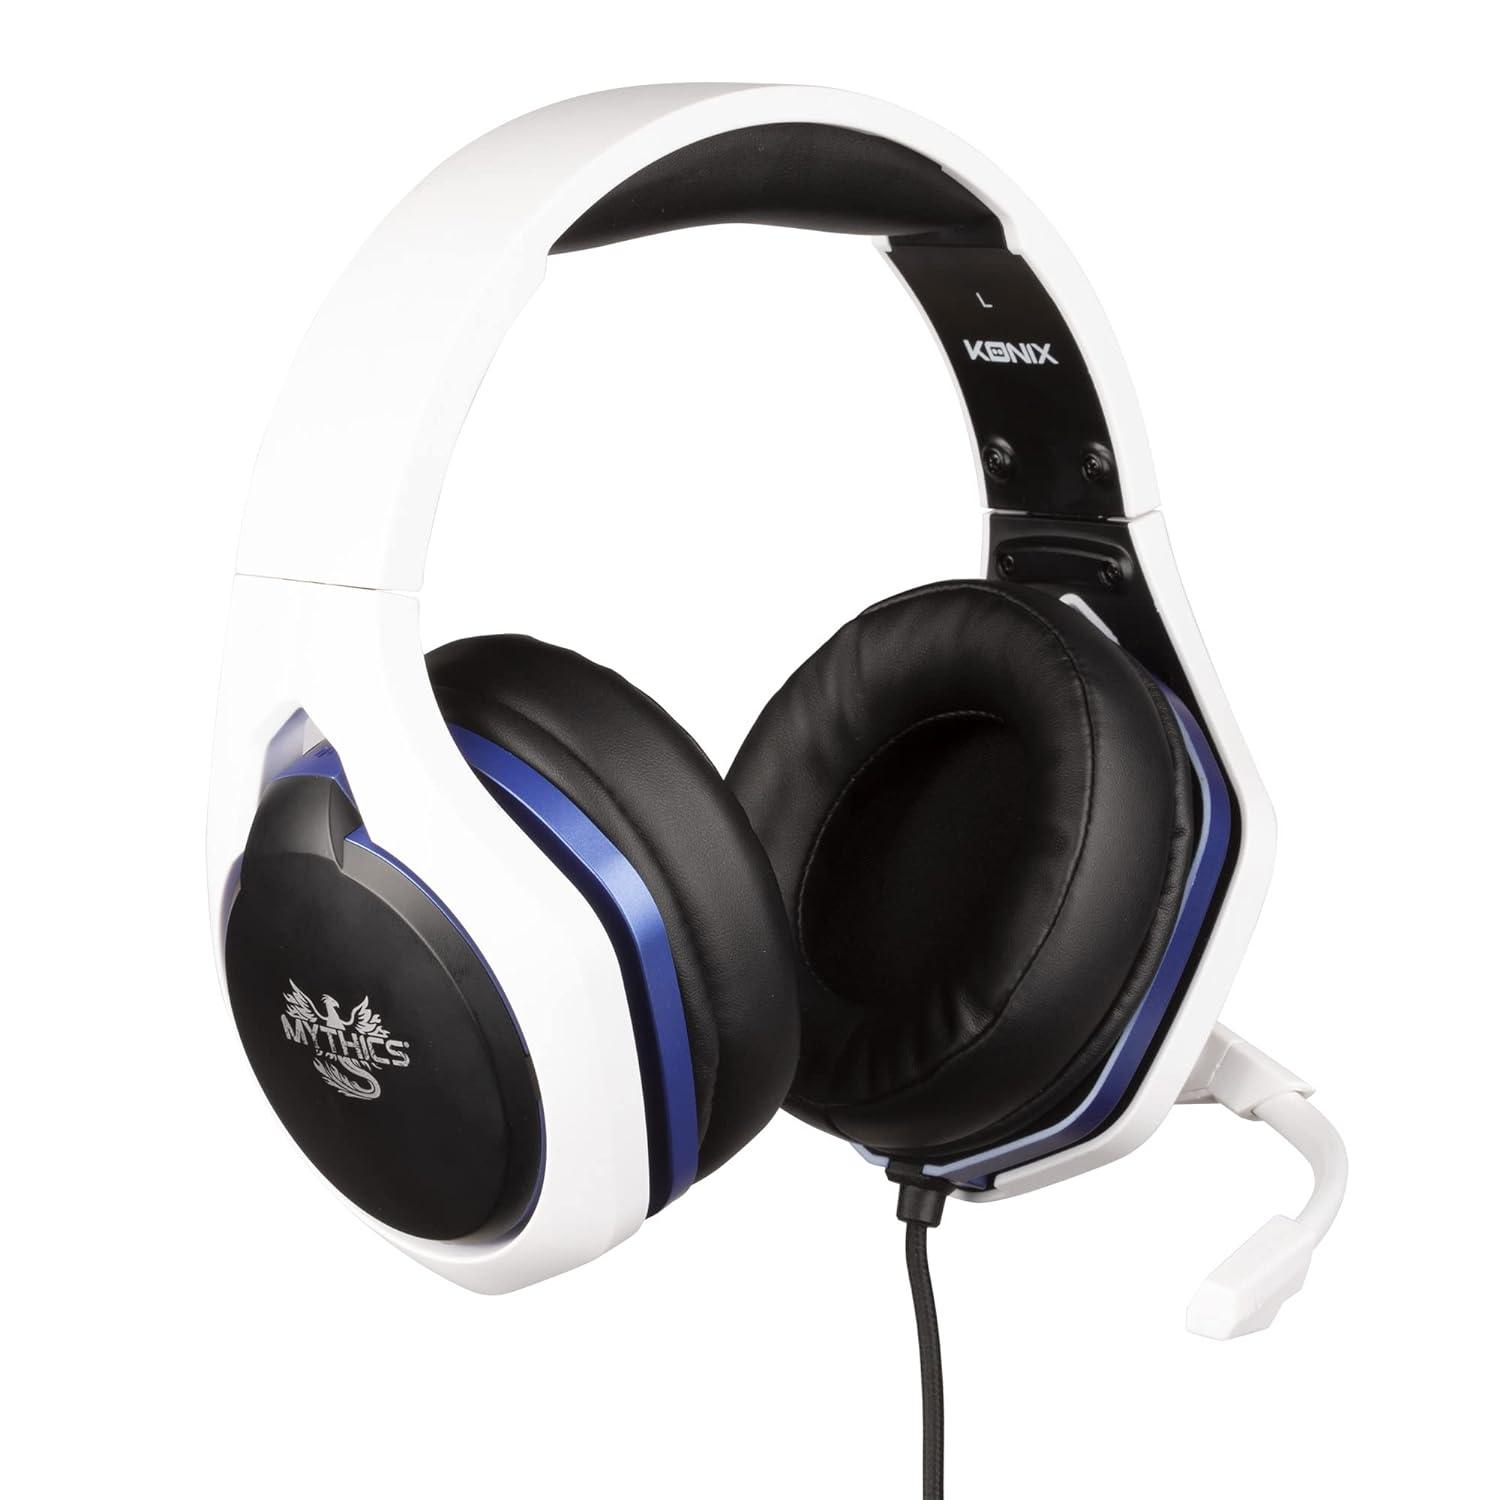 Konix Mythics Hyperion Wired Gaming Headset - PS5 - GameStore.mt | Powered by Flutisat